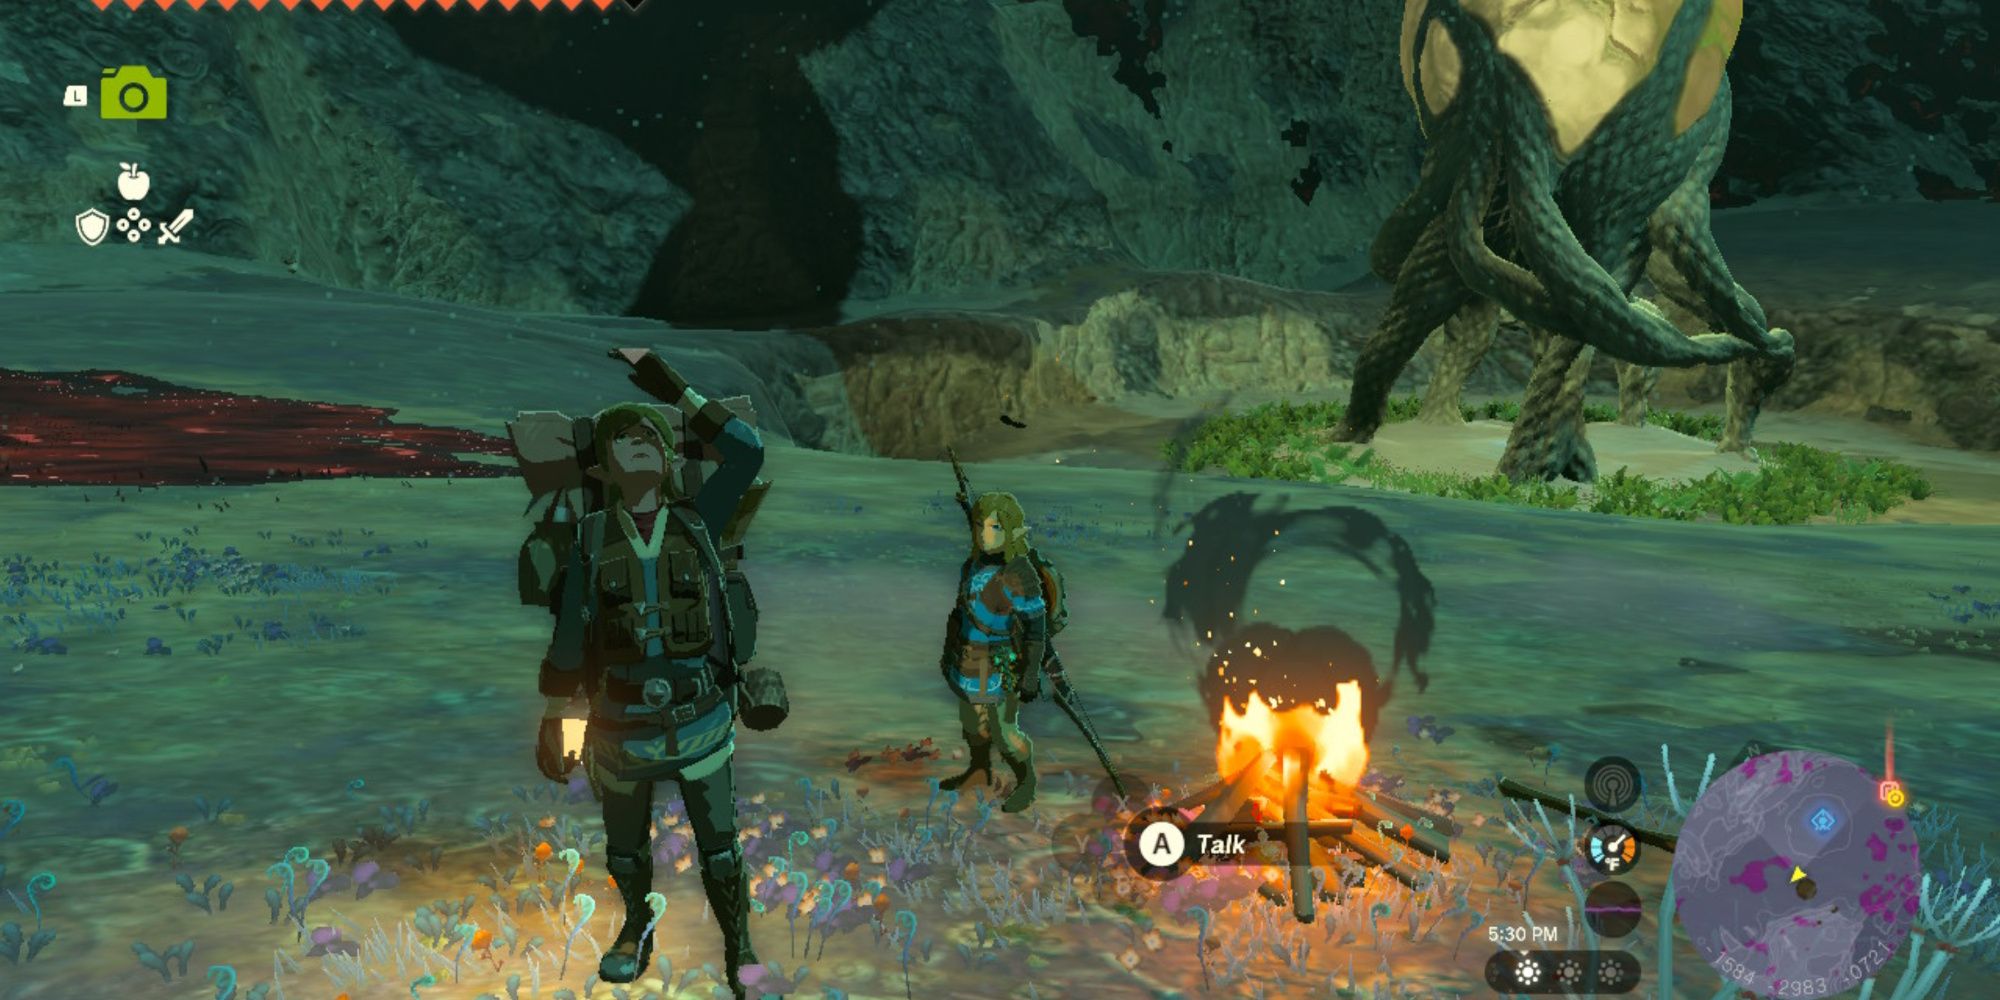 The Legend of Zelda: Tears of the Kingdom: Infantrymen of the Yiga clan disguised as researchers of the depths, staring at the empty Zonai device